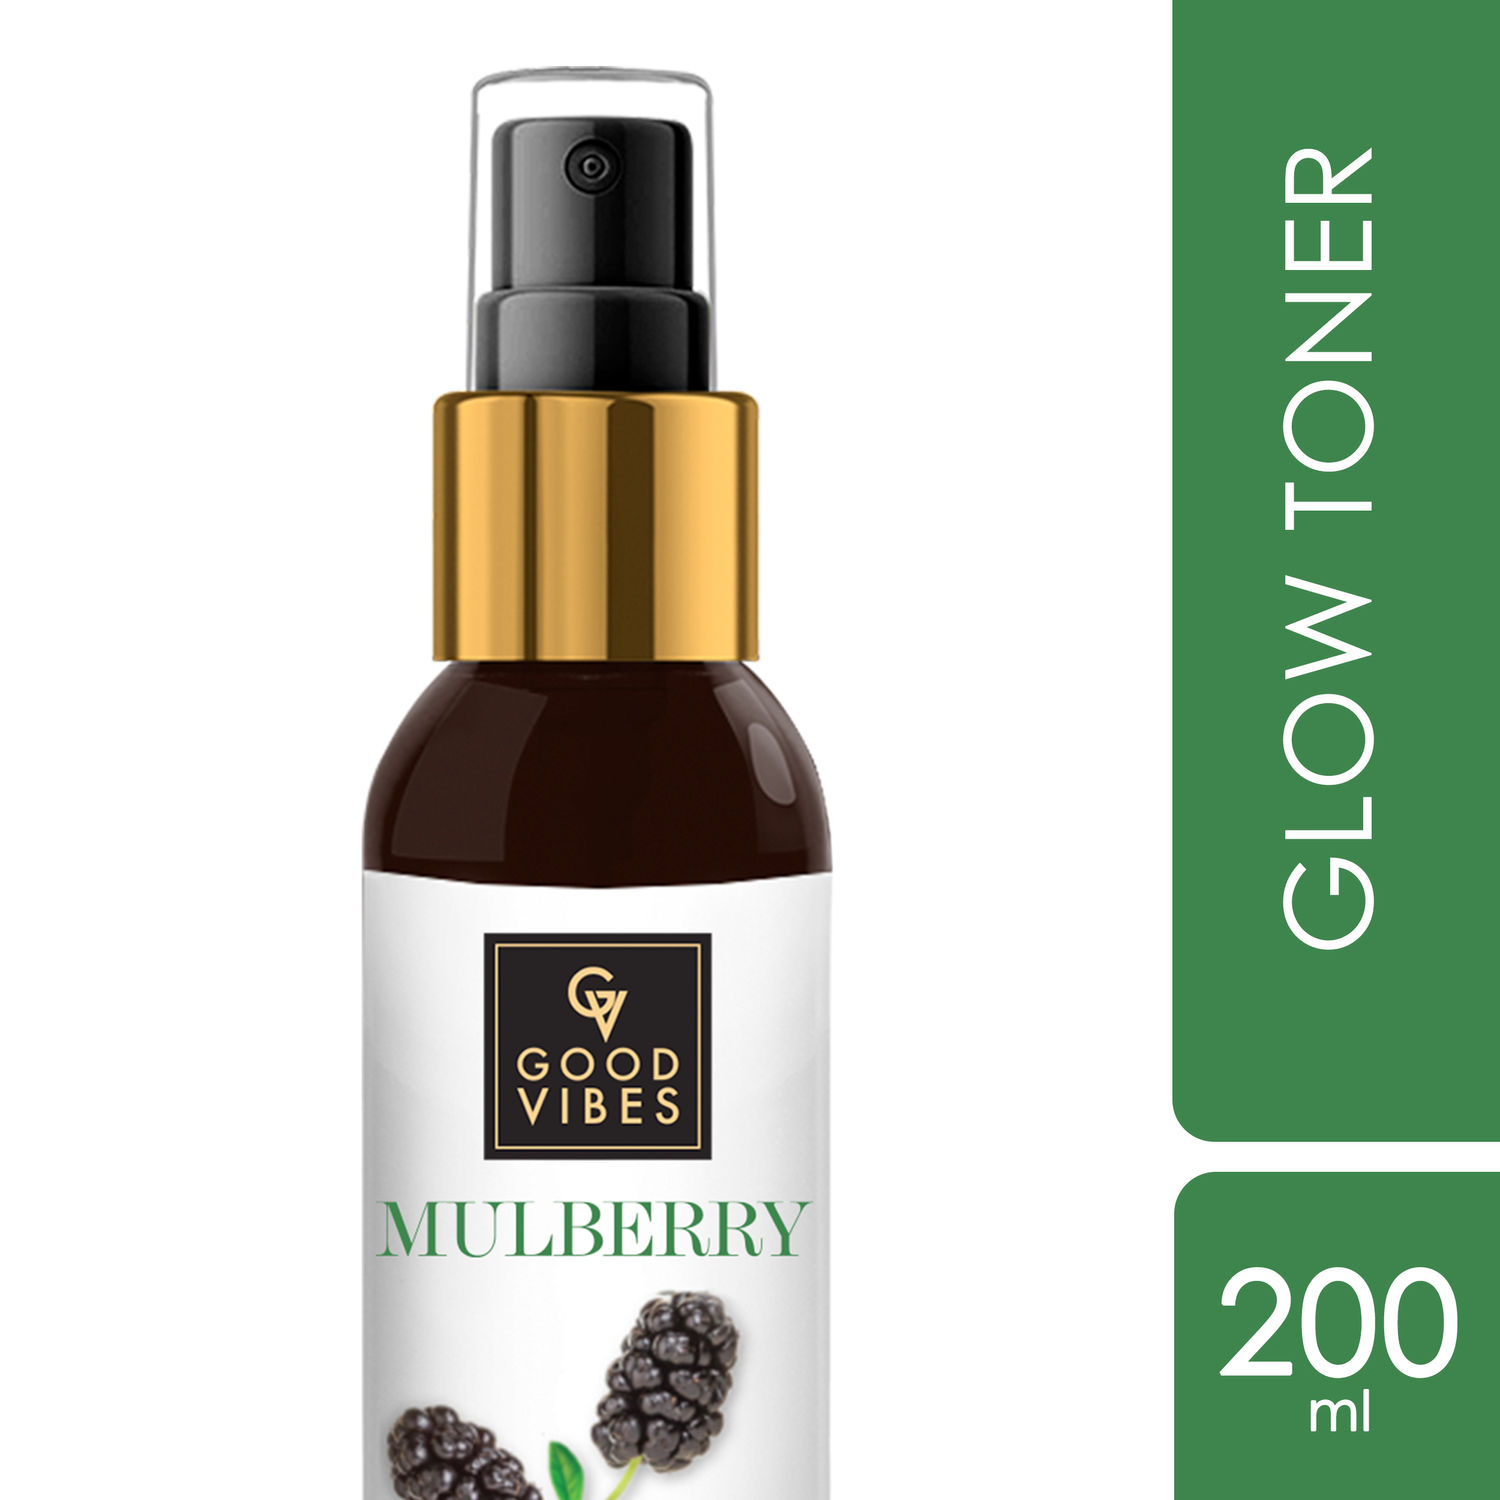 Good Vibes Mulberry Glow Toner | Anti-Ageing, Lightening | No Parabens, No Alcohol, No Sulphates, No Mineral Oil, No Animal Testing (200 ml)